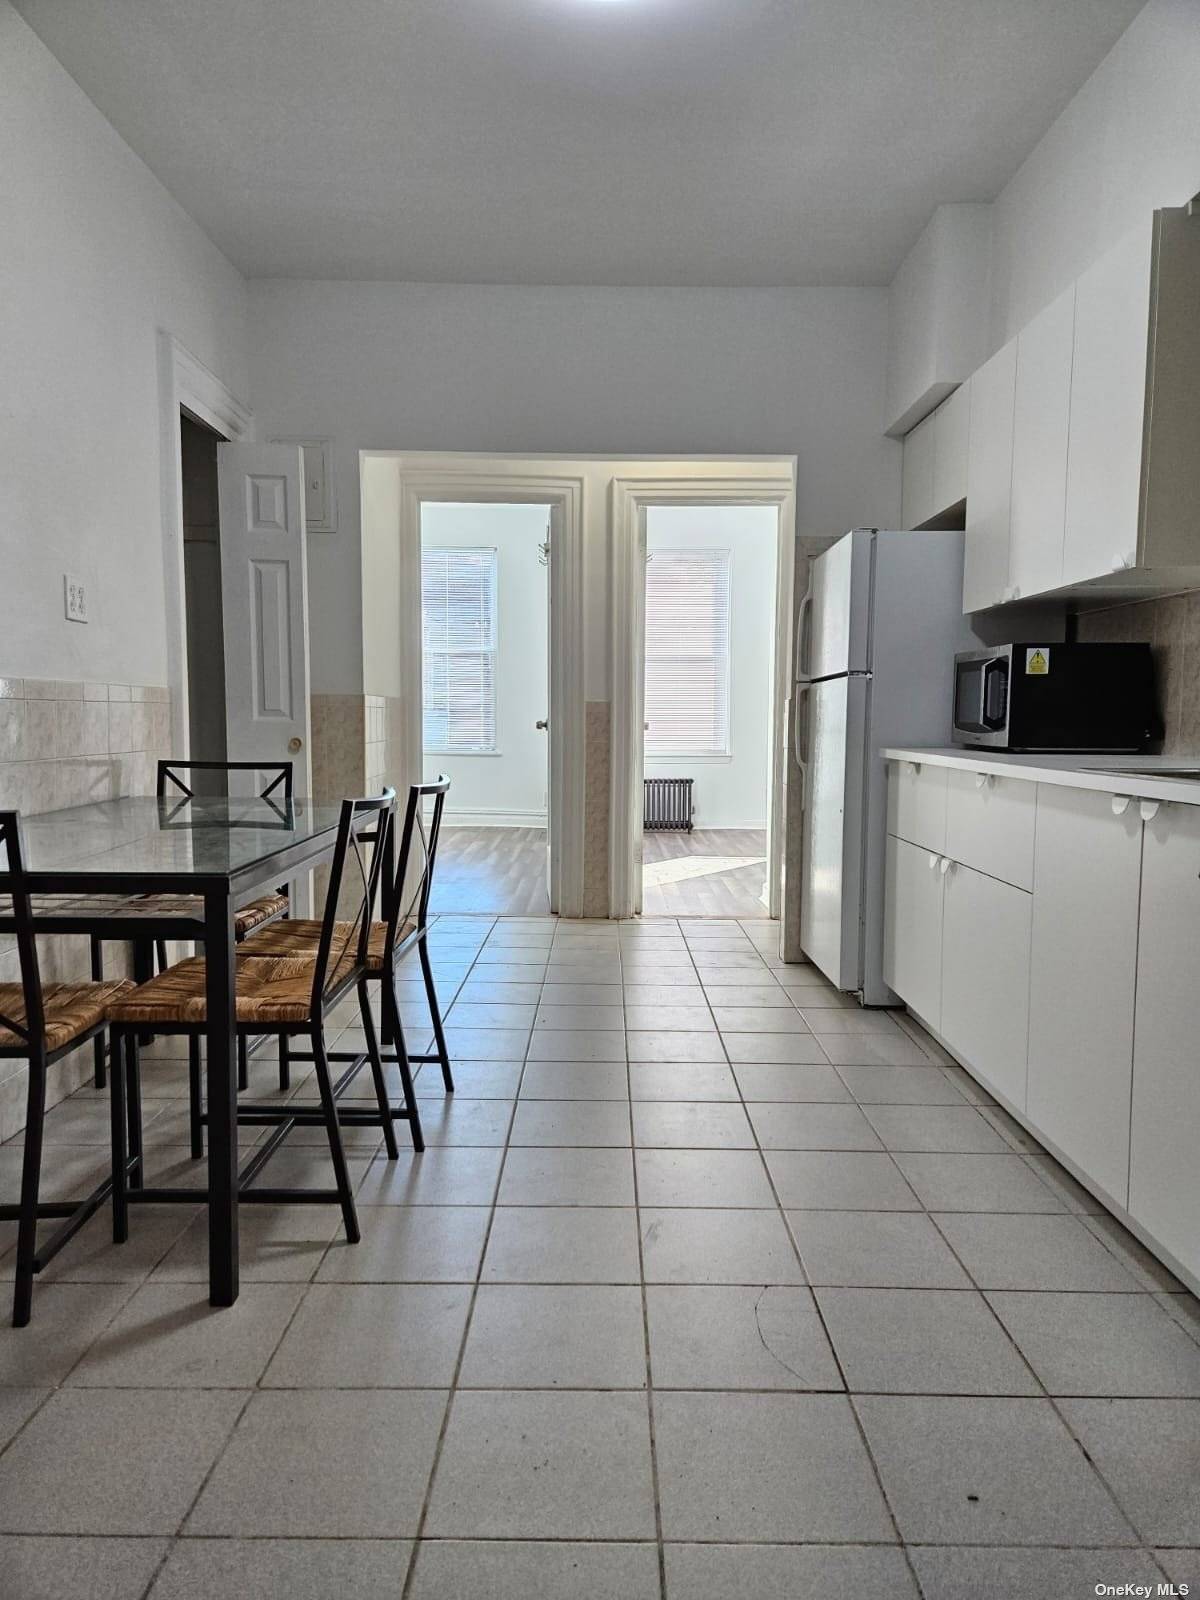 4 Bedroom apartment with spacious kitchen and living areas Features Spacious eat in kitchen Bright living room 2 Queen Bedrooms 2 Full Bedrooms 1 Full bathroom Heat and Hot Water ...